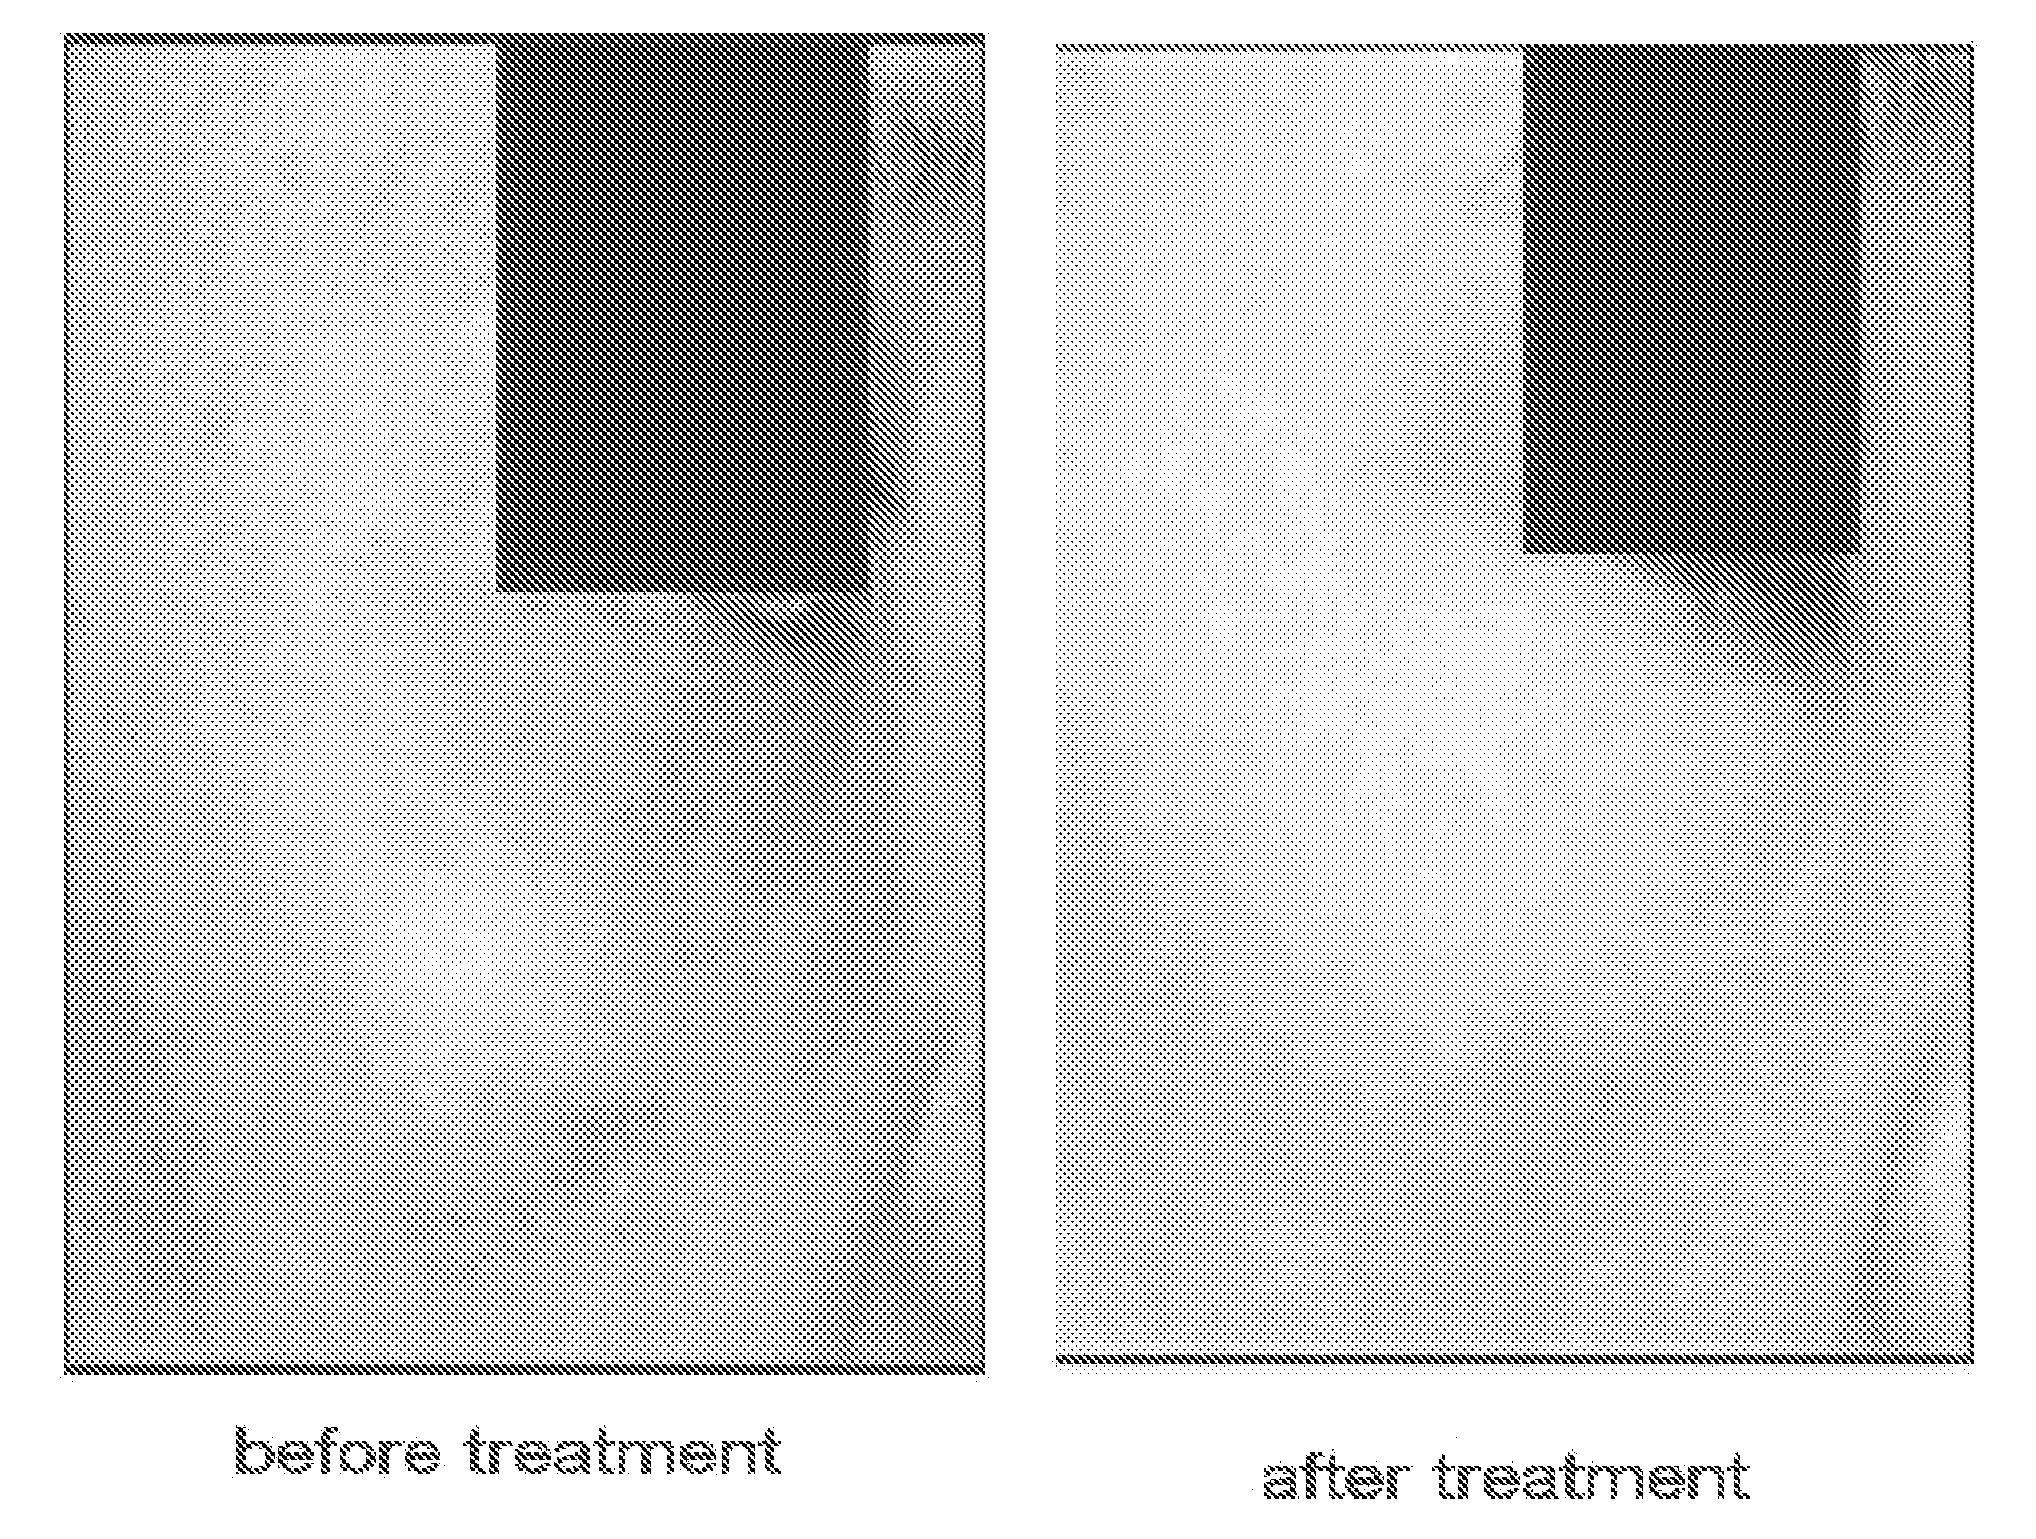 Composition and Method for Inhibition of Melanin Synthesis